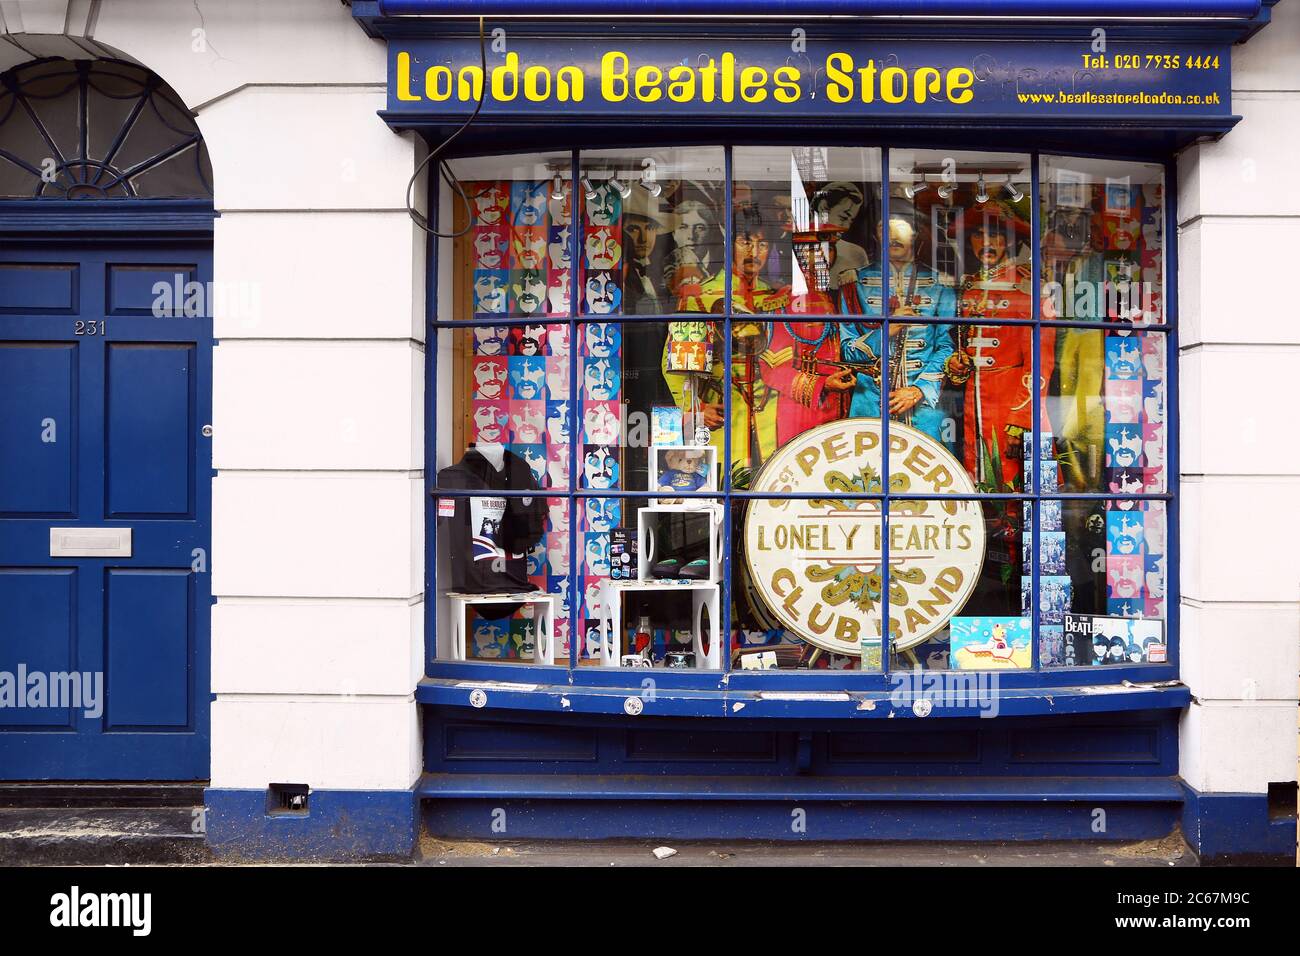 Beatles store in London Stock Photo